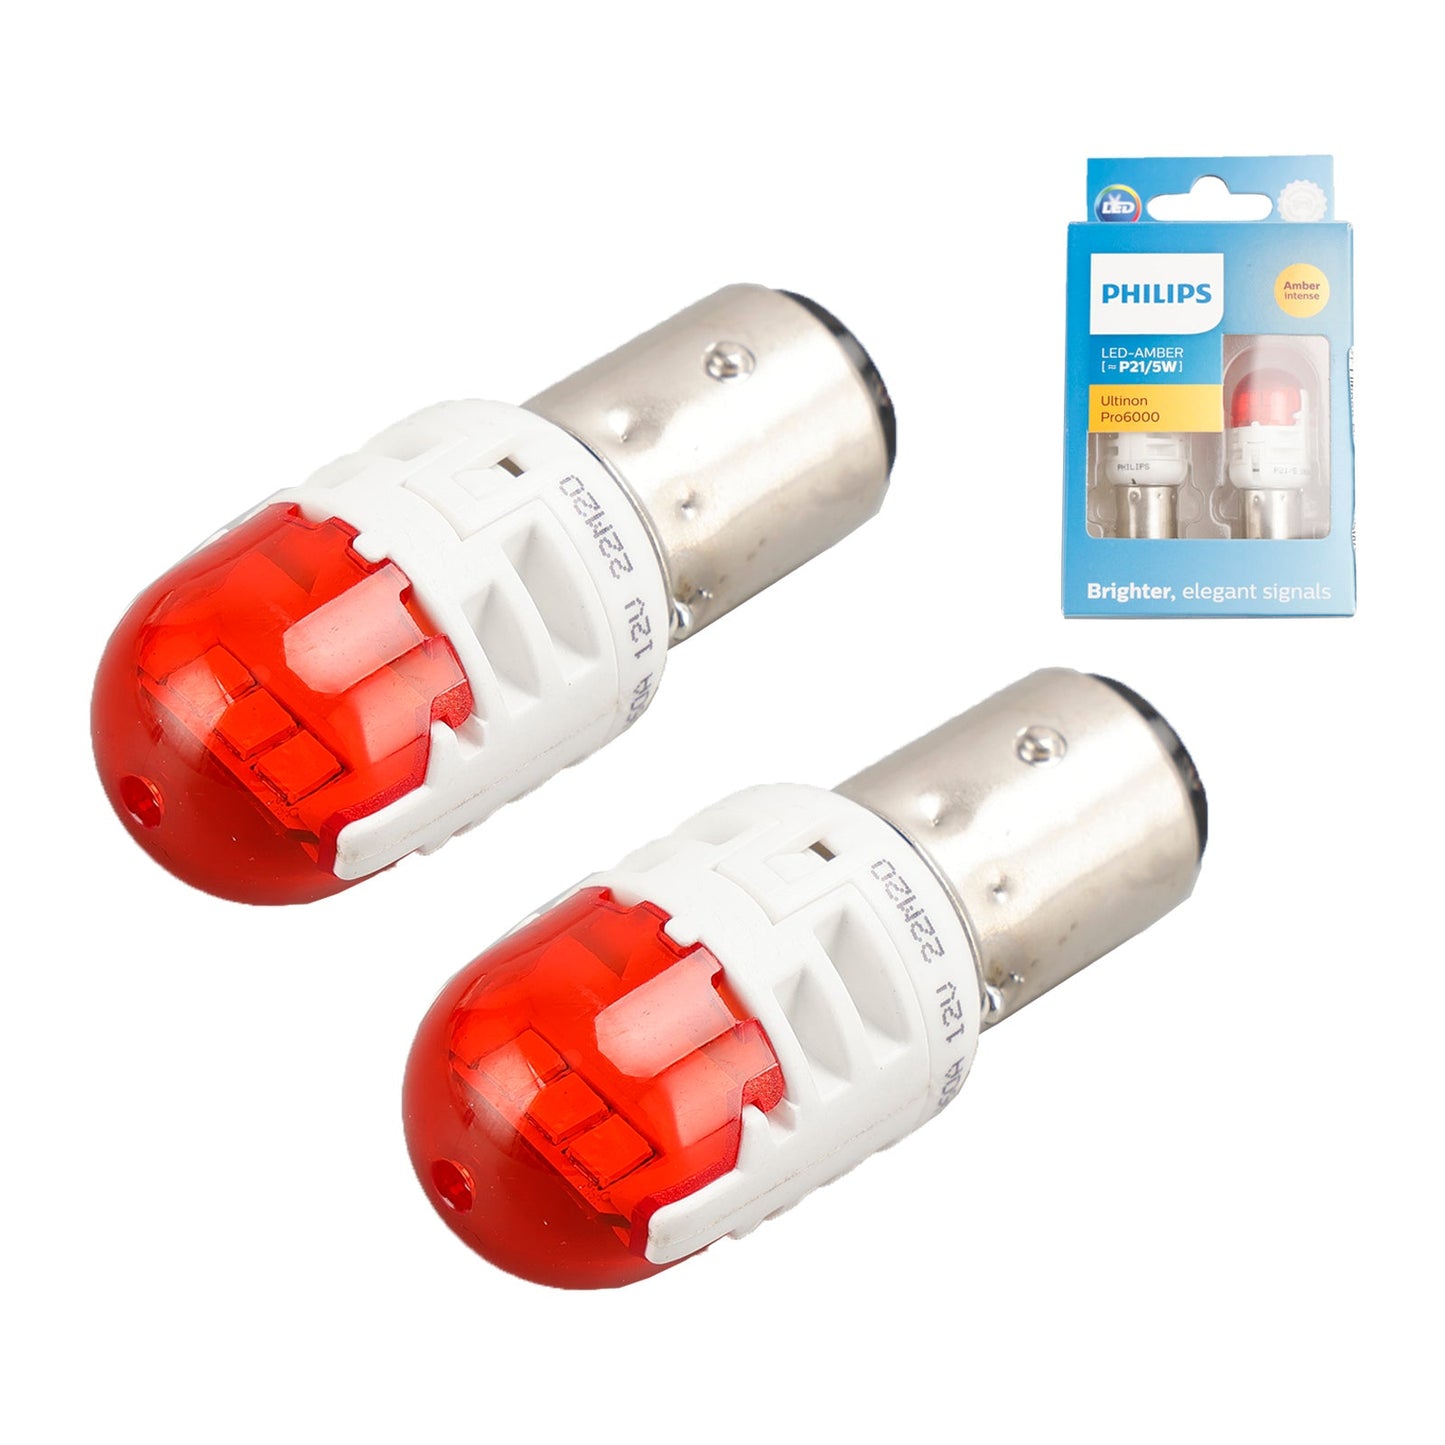 Für Philips 11499AU60X2 Ultinon Pro6000 LED-AMBER P21/5W intensiver AMBER 80/16lm